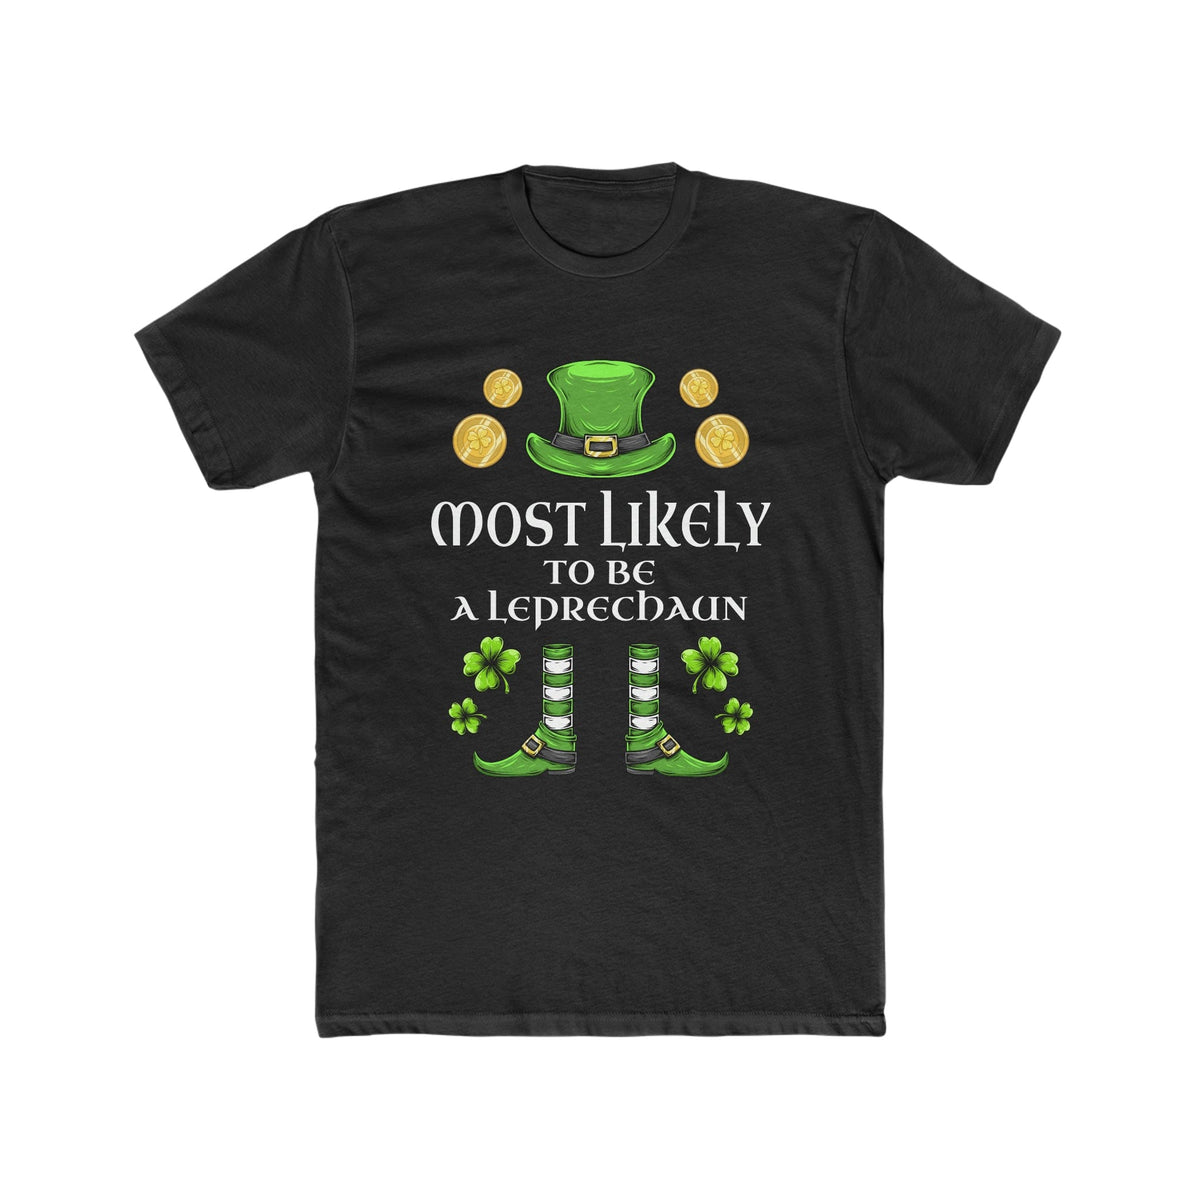 Most likely TO BE A LEPRECHAUN Premium Unisex Shirt